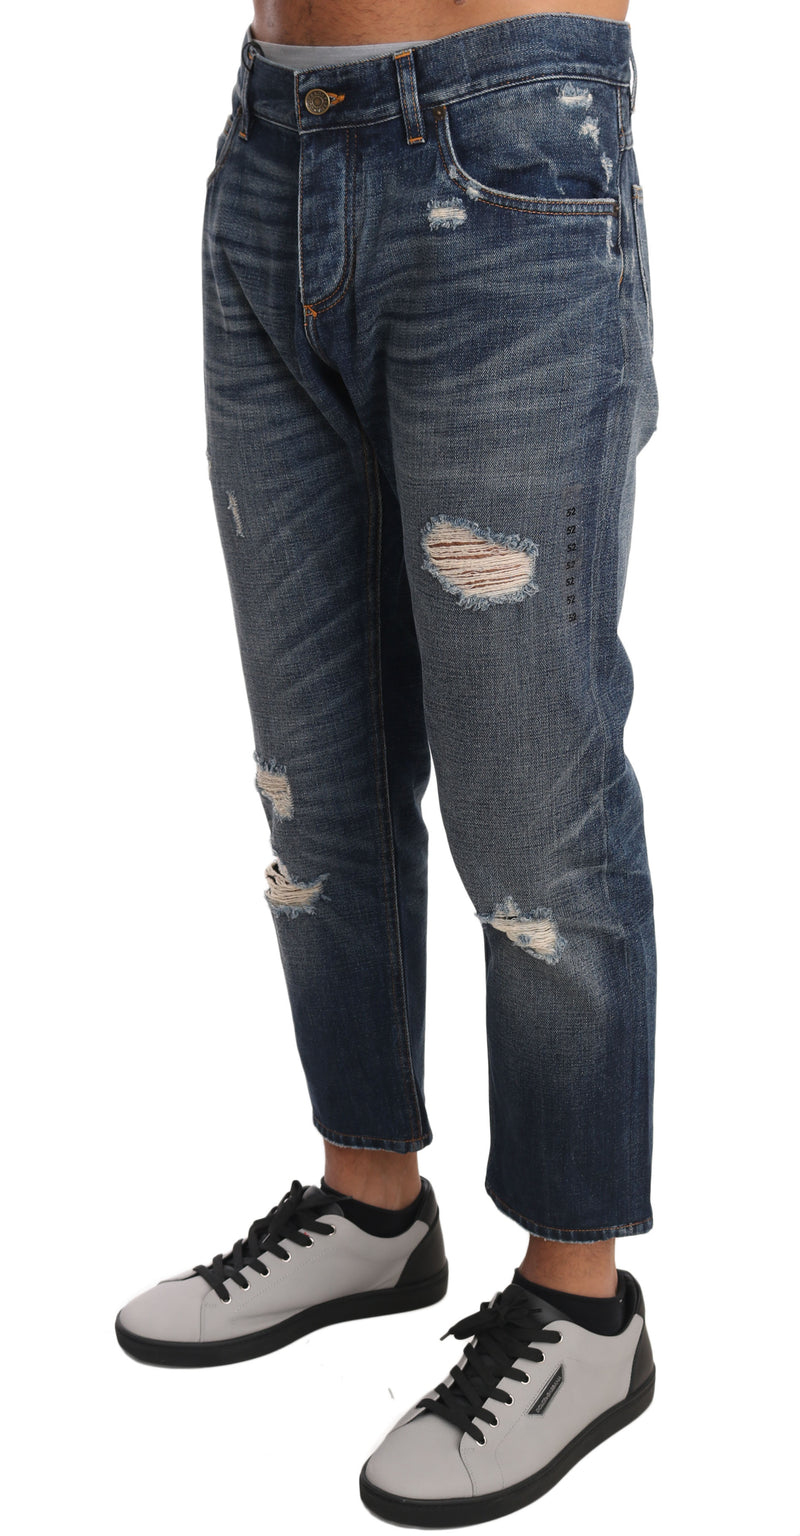 Blue Cotton Ripped Jeans Cropped Pants